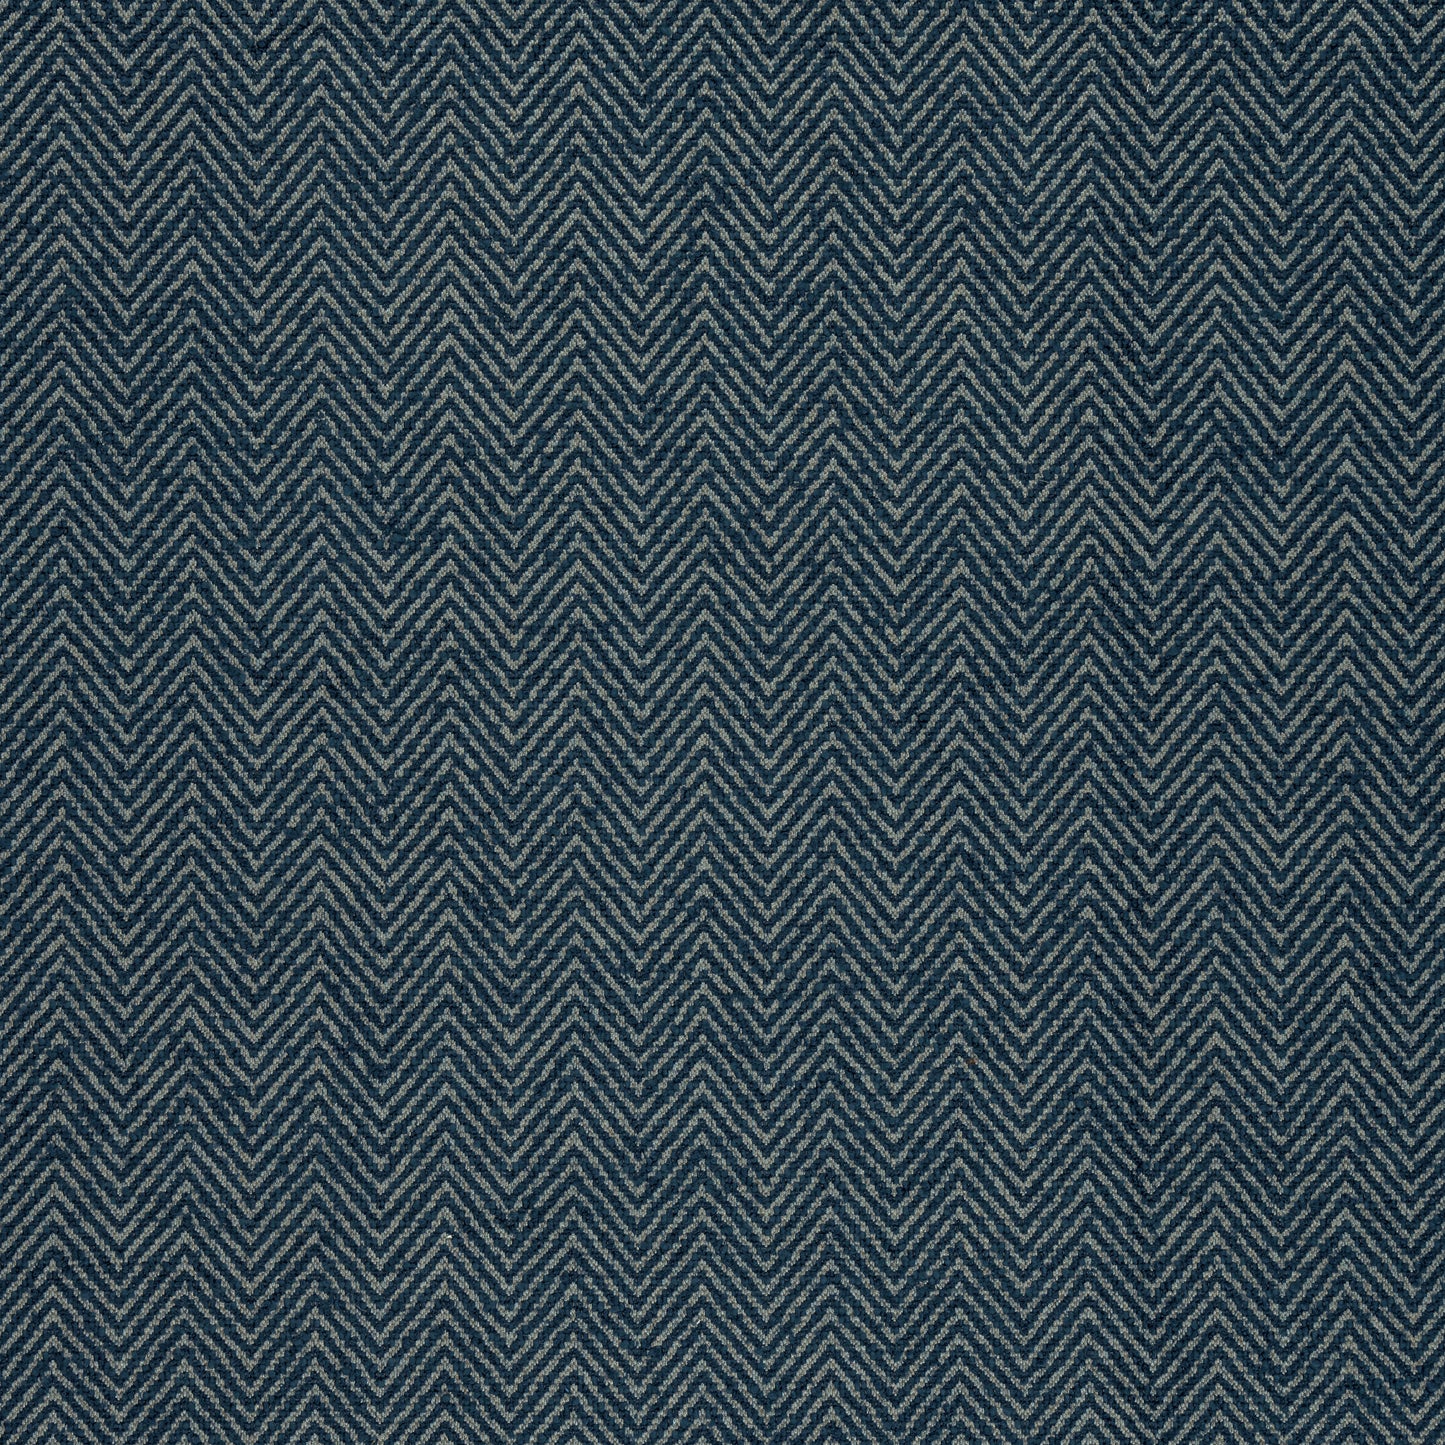 Purchase Thibaut Fabric SKU# W77134 pattern name Monviso color Navy